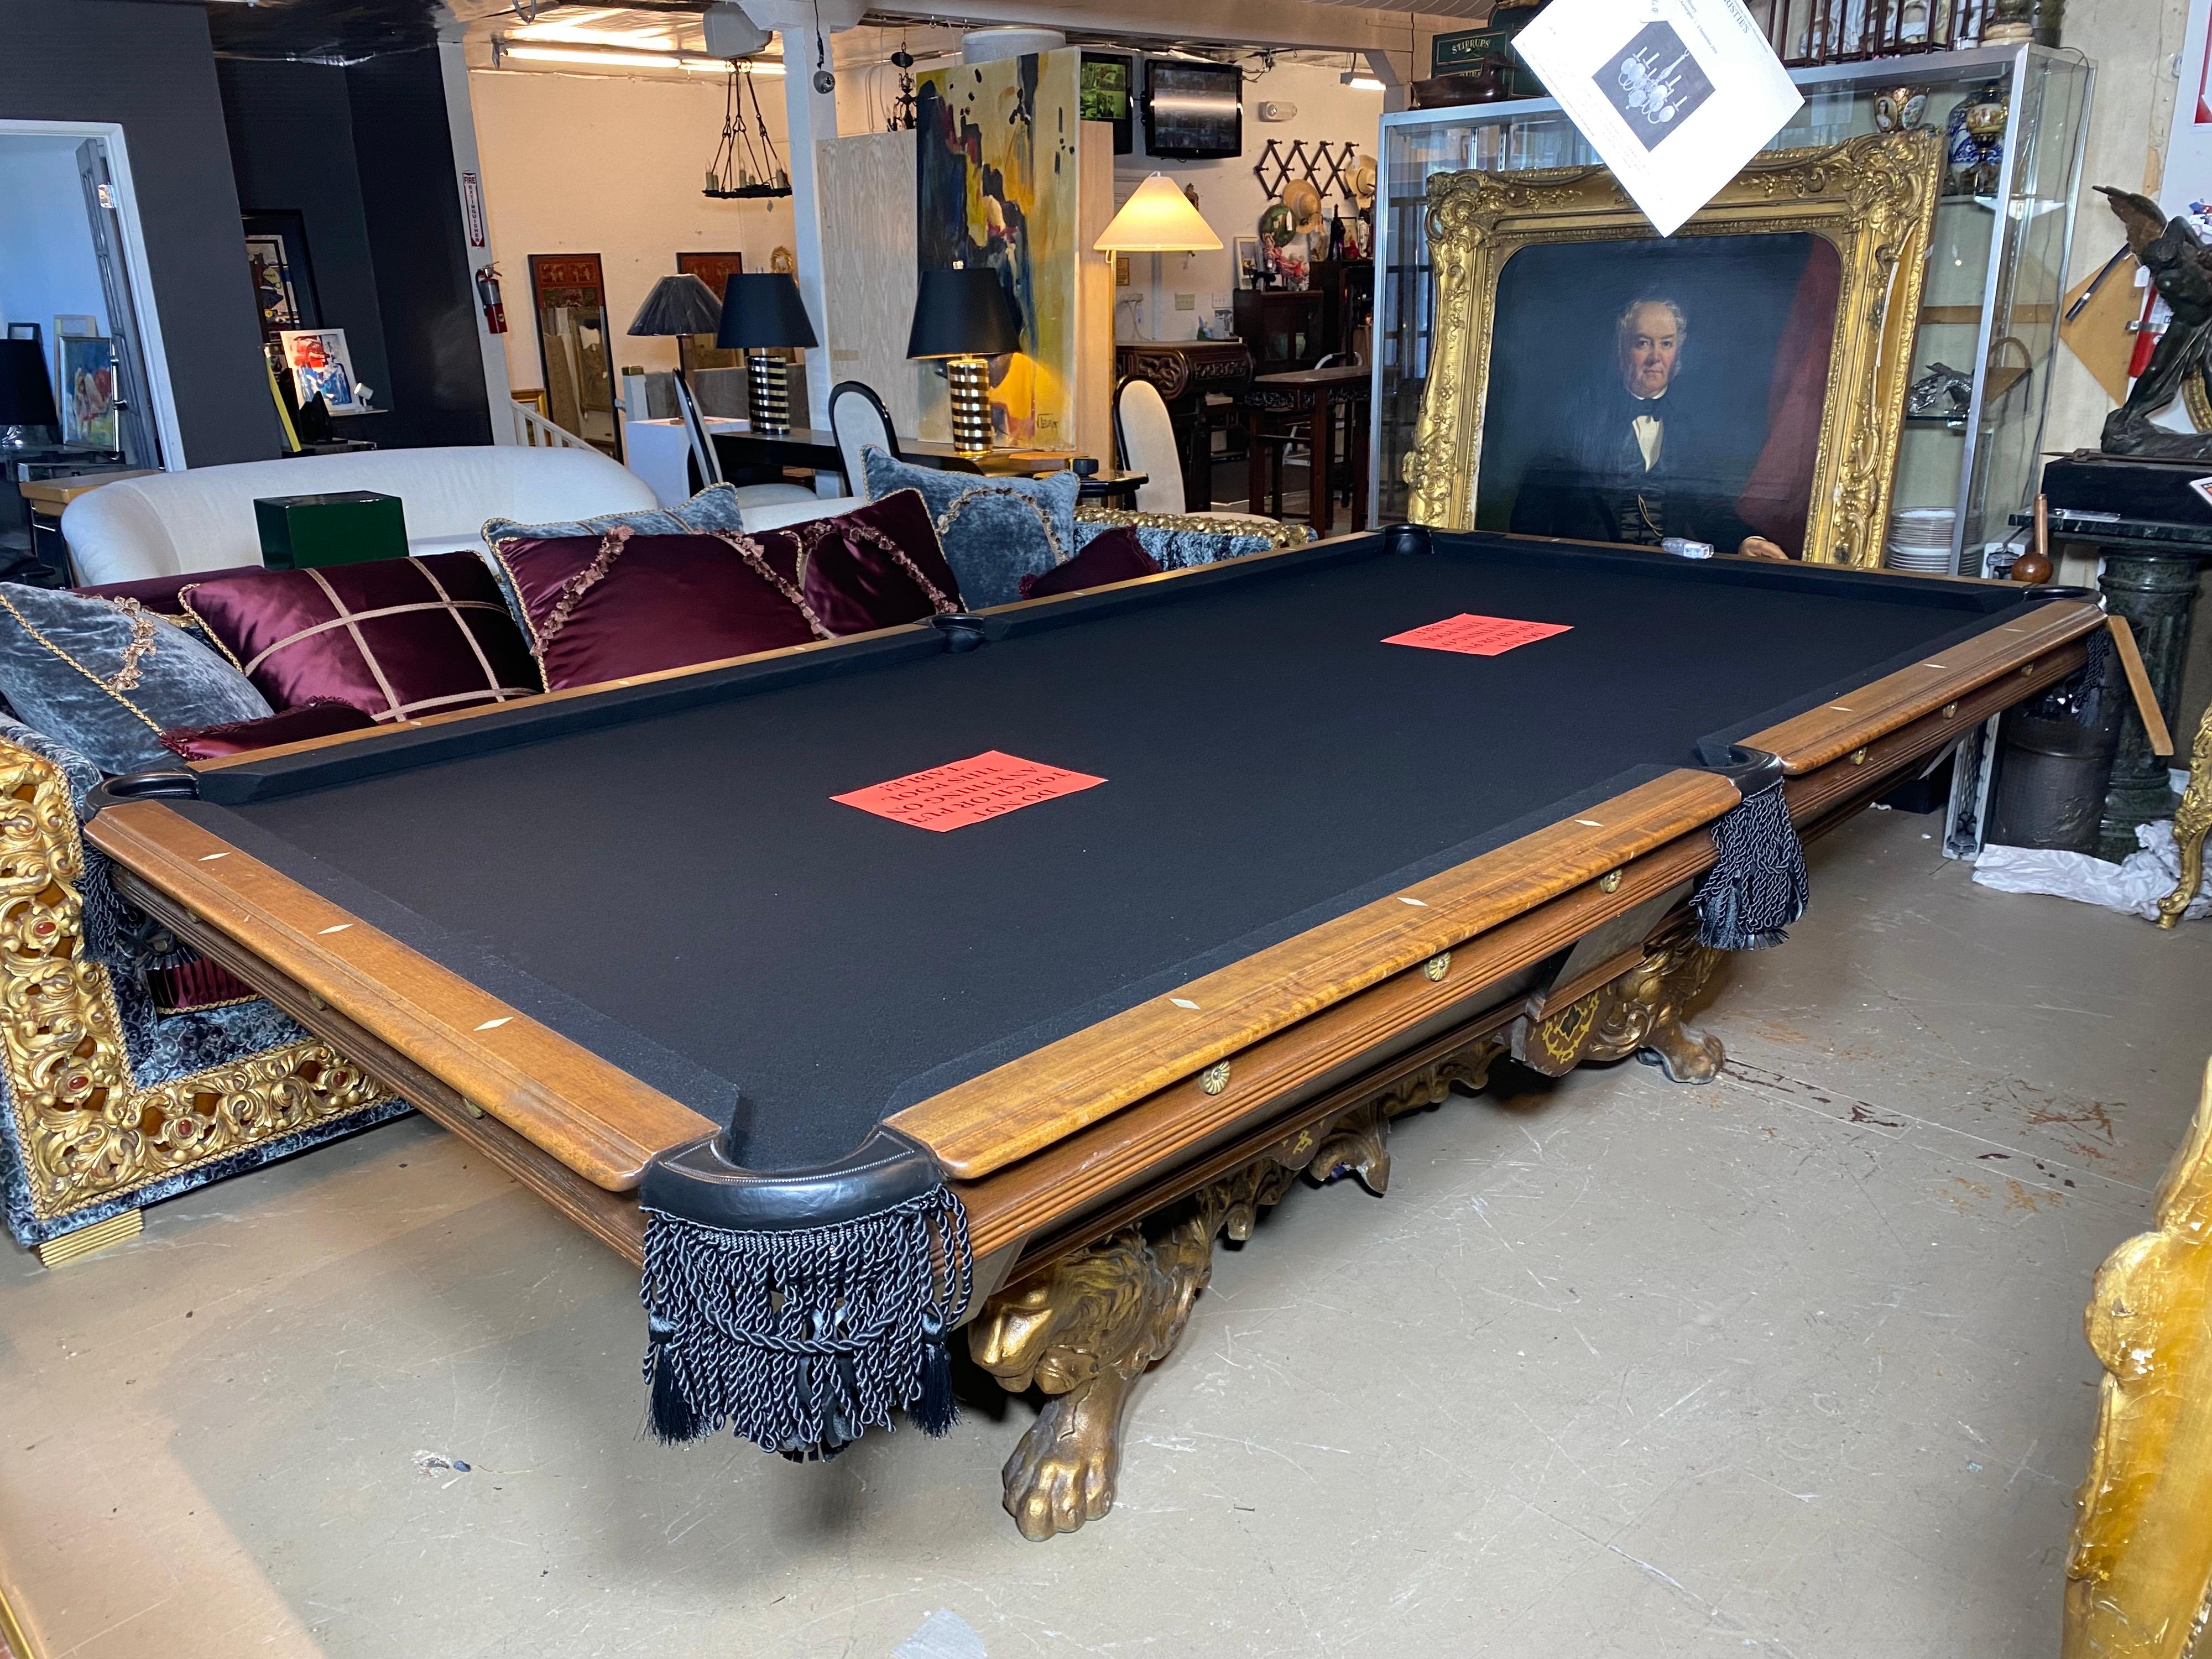 Vintage Custom 9’ pool table with a very ornate gilt cast Lion base. Restored to perfection having a rich and sophisticated appearance. The gilt lion base showing power and strength with the upmost class. The table is fitted with brand new pockets